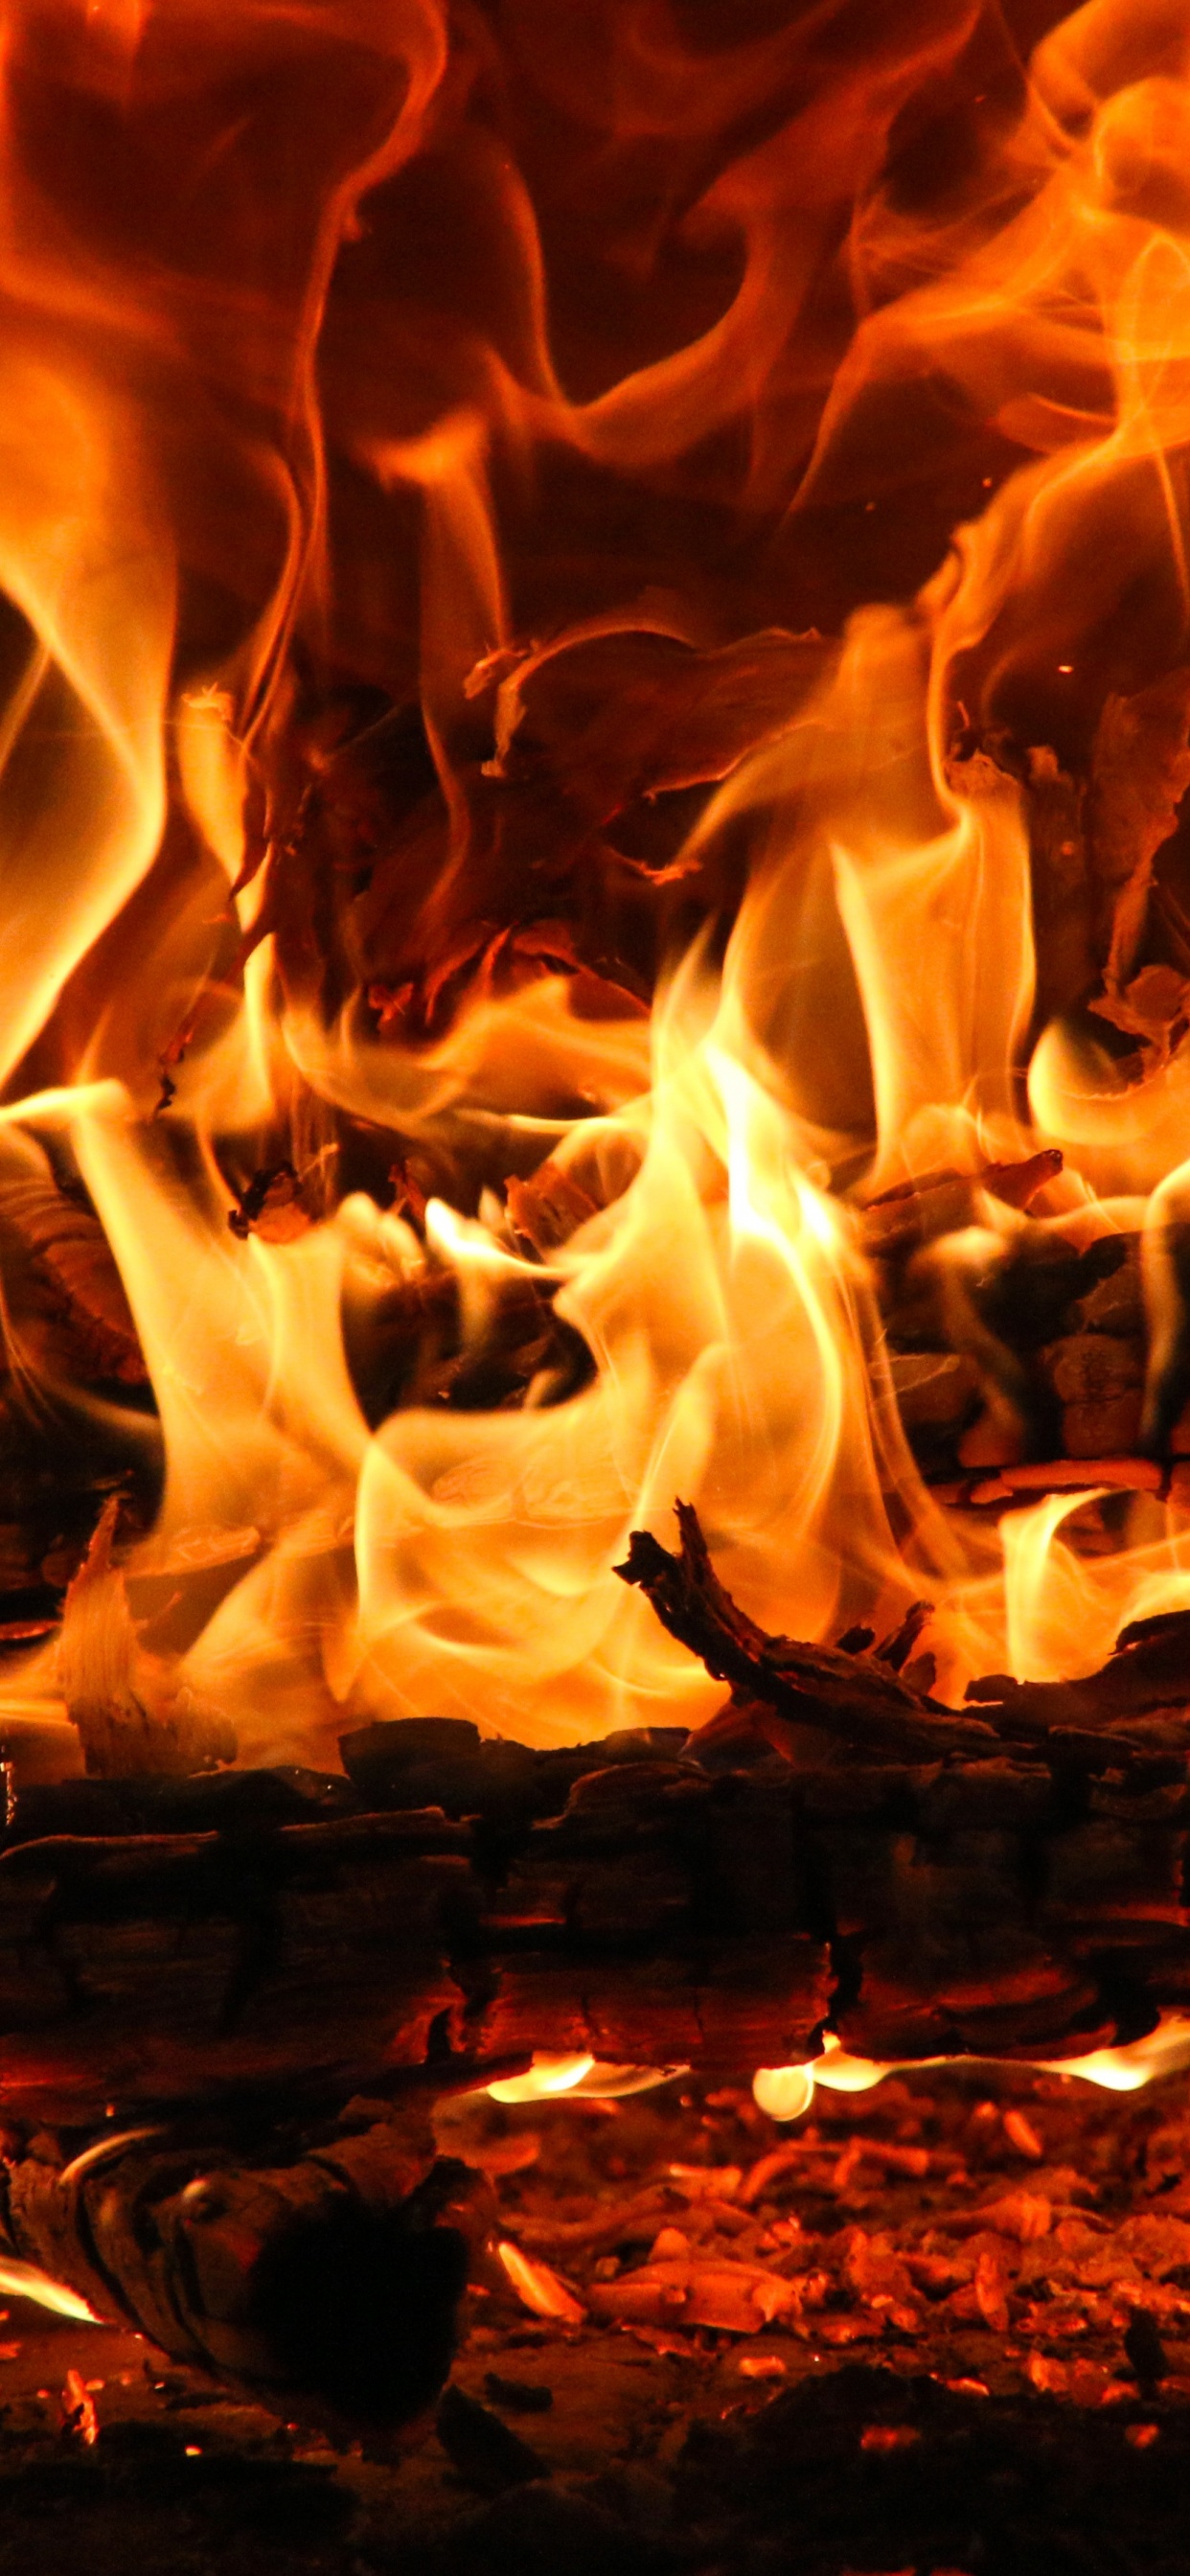 Burning Wood on Brown Soil. Wallpaper in 1242x2688 Resolution